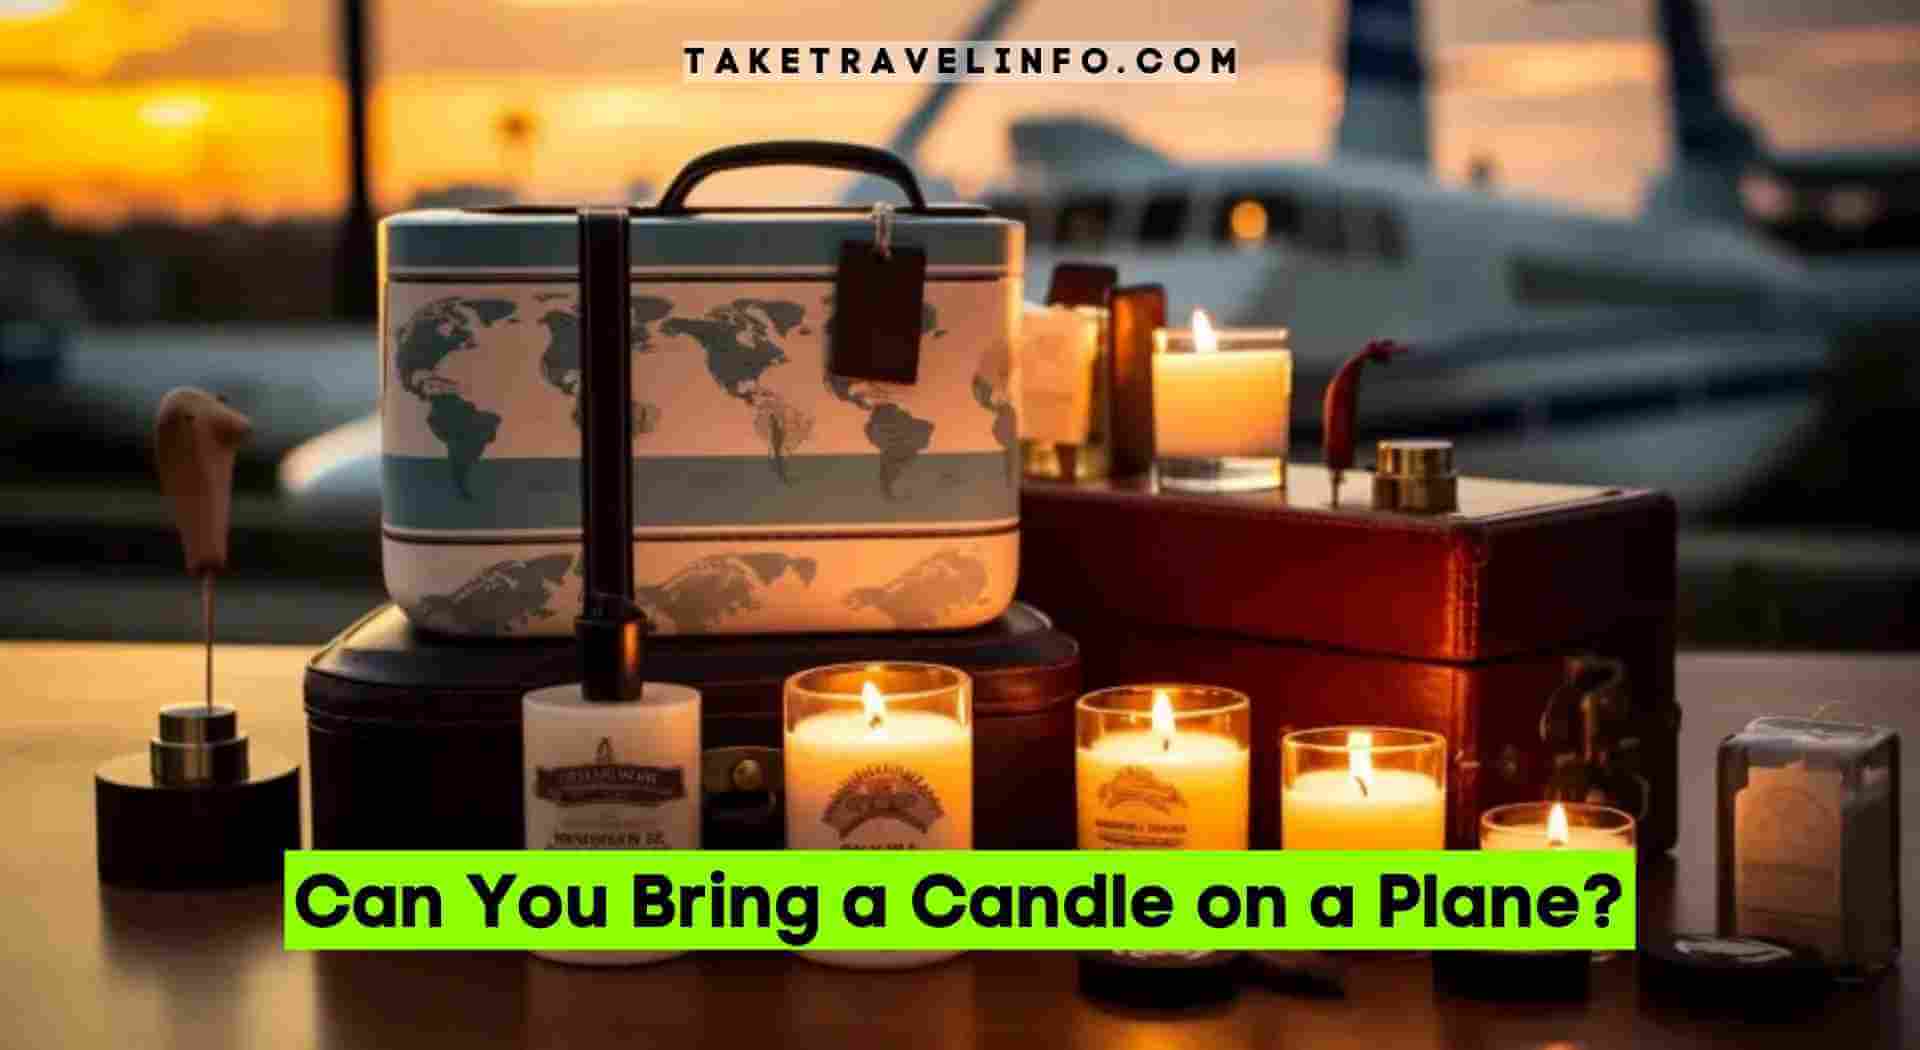 Can You Bring a Candle on a Plane?